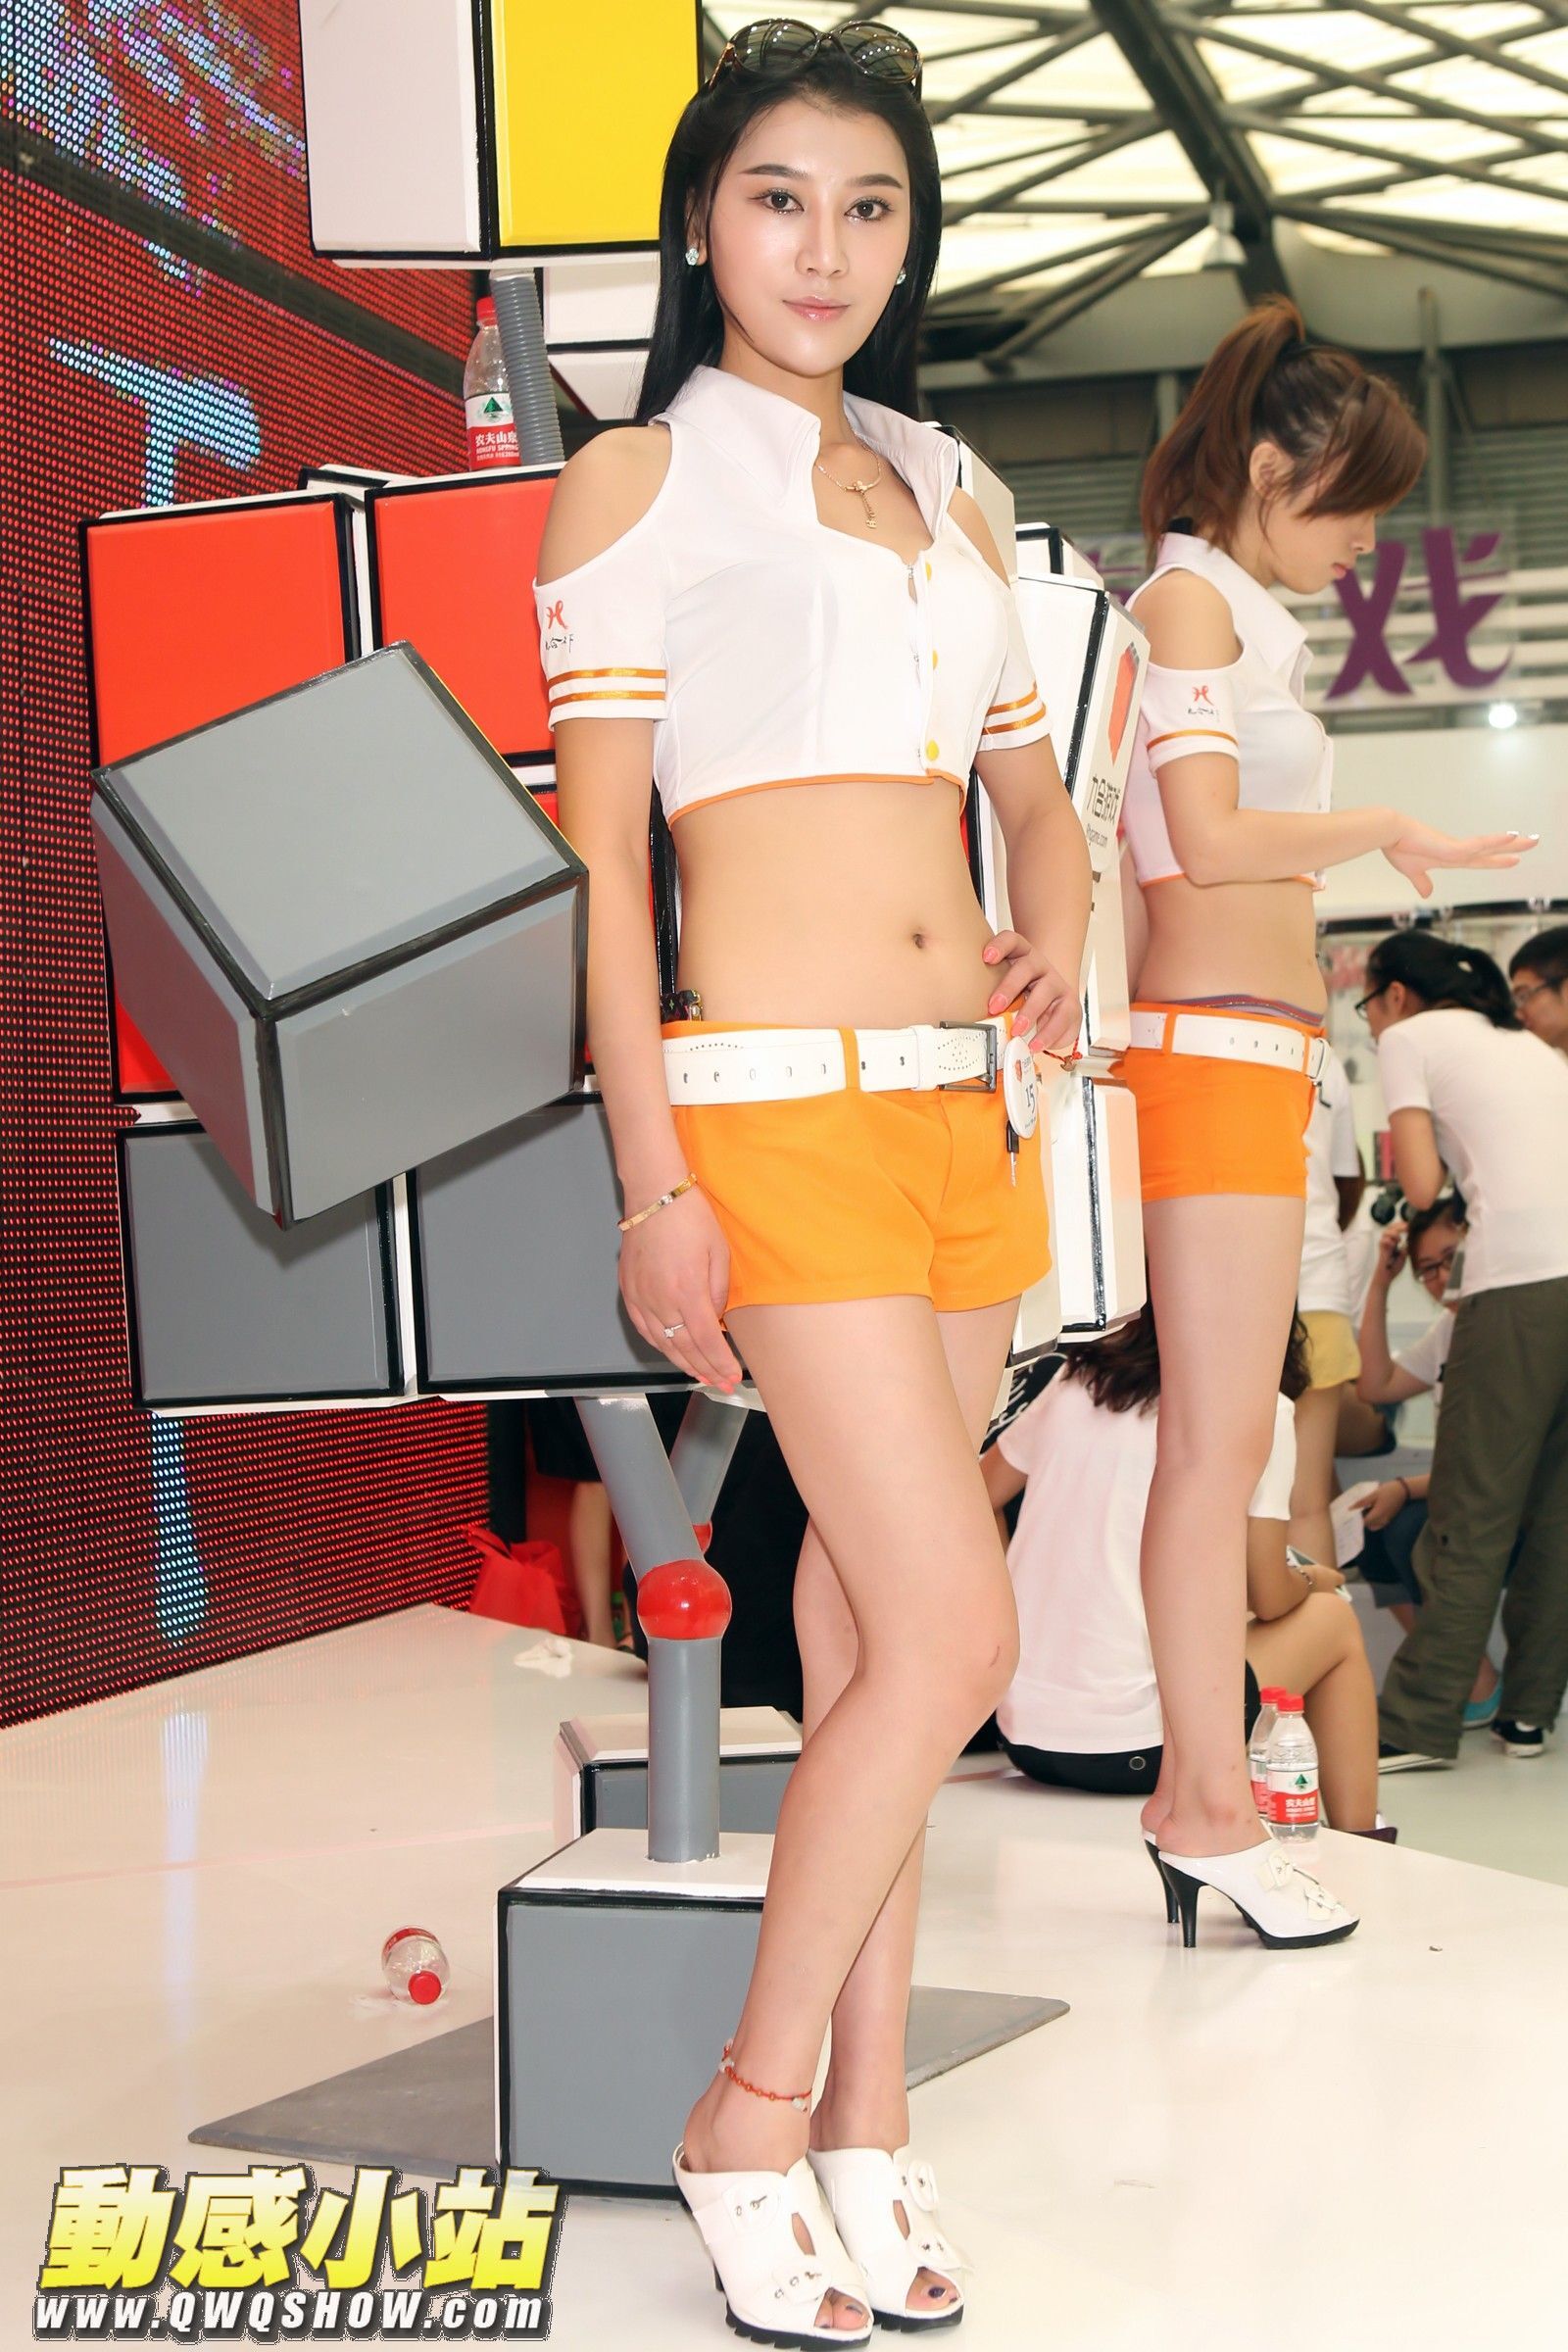 Outdoor photo of Jiuhe game model in Shanghai China joy video game exhibition